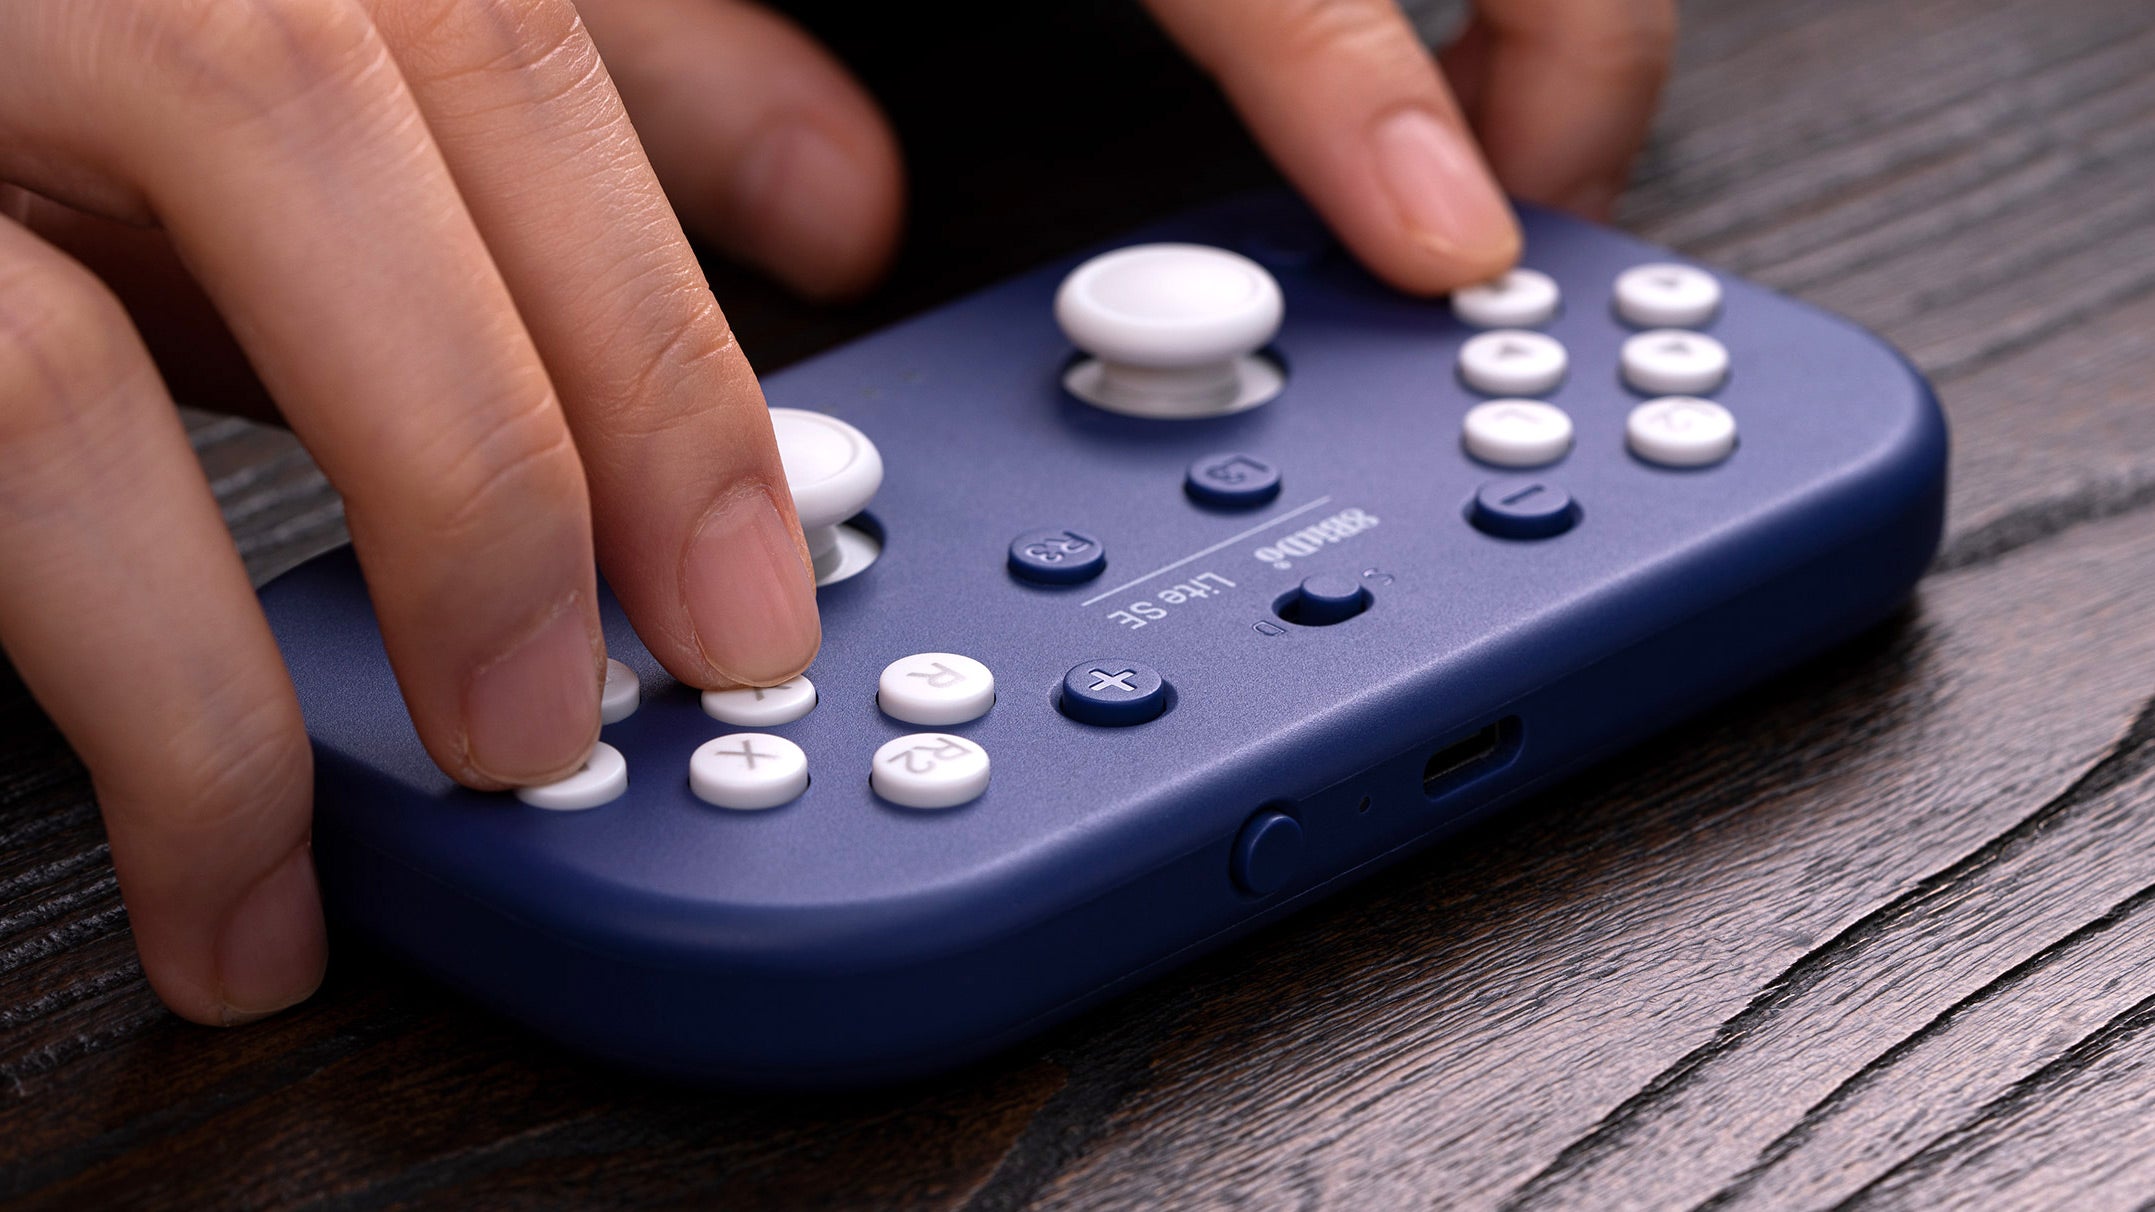 8BitDo’s Lite SE Controller Helps Gamers With Limited Mobility By Putting All the Buttons on the Front